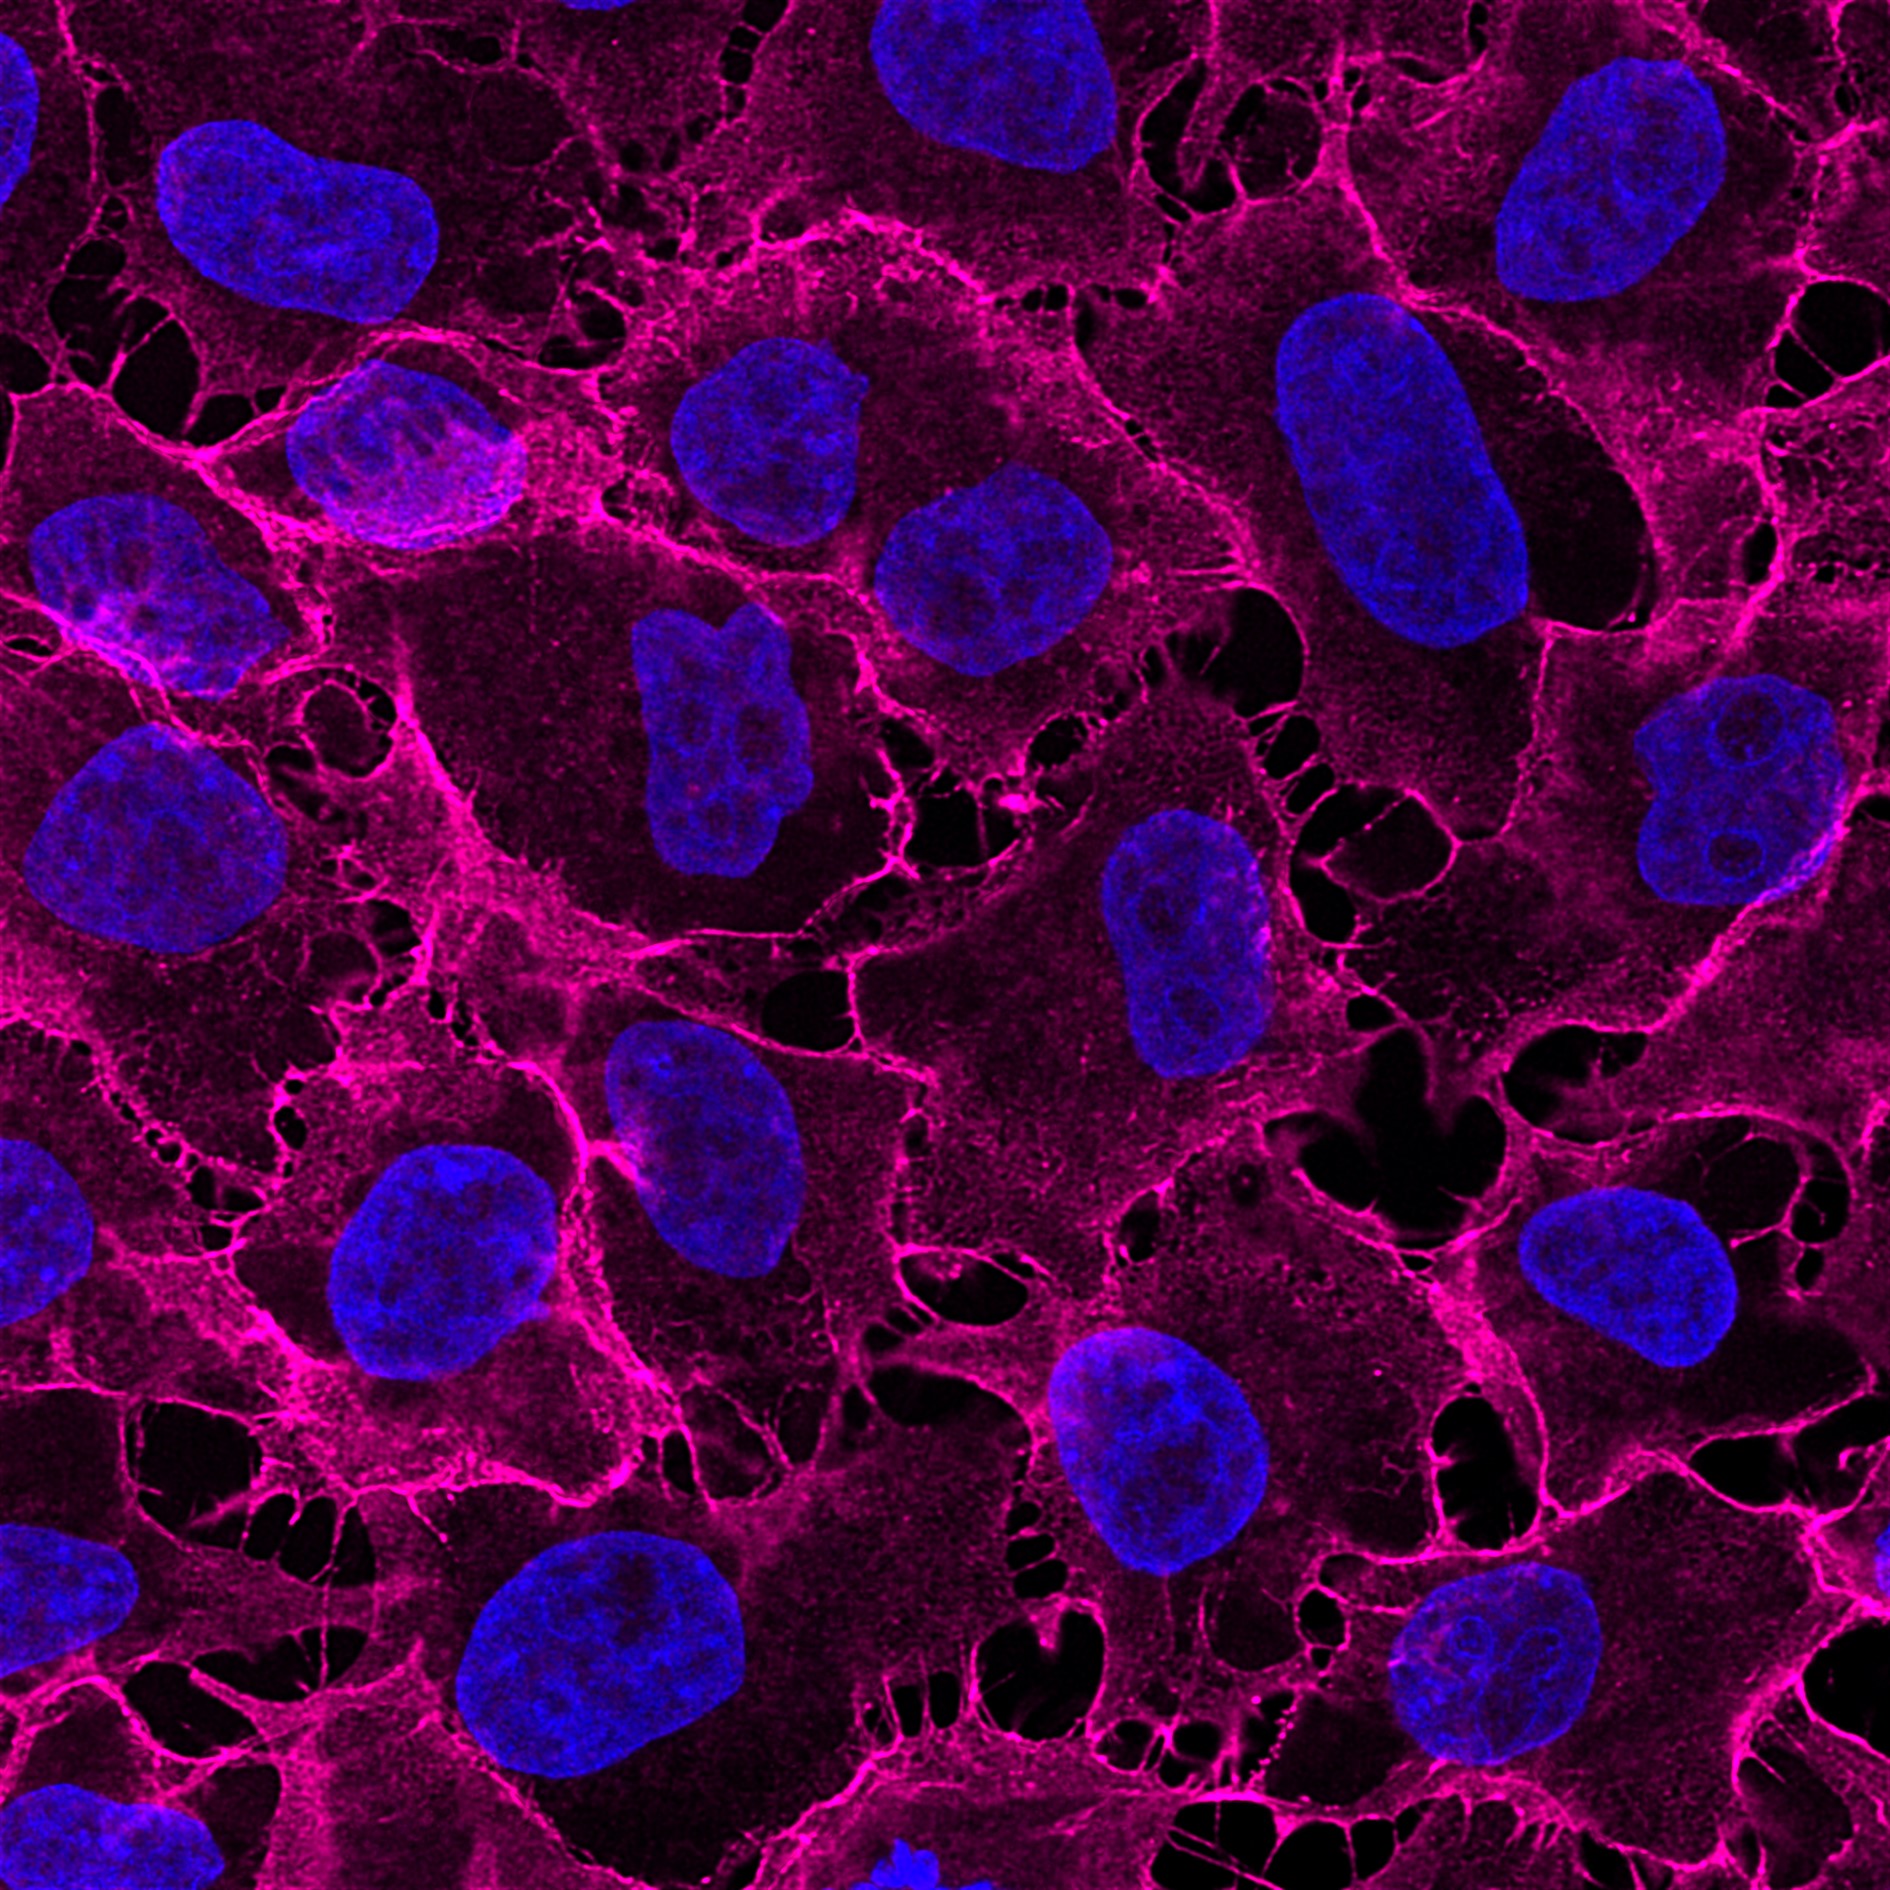 Immunofluorescence analysis of HeLa cells stained with mouse IgG1 anti-CD147 antibody and Nano-Secondary® alpaca anti-mouse IgG1, recombinant VHH, CoraLite® Plus 647 (smsG1CL647-1, magenta). Nuclei were stained with DAPI (blue). Images were recorded at the Core Facility Bioimaging at the Biomedical Center, LMU Munich.